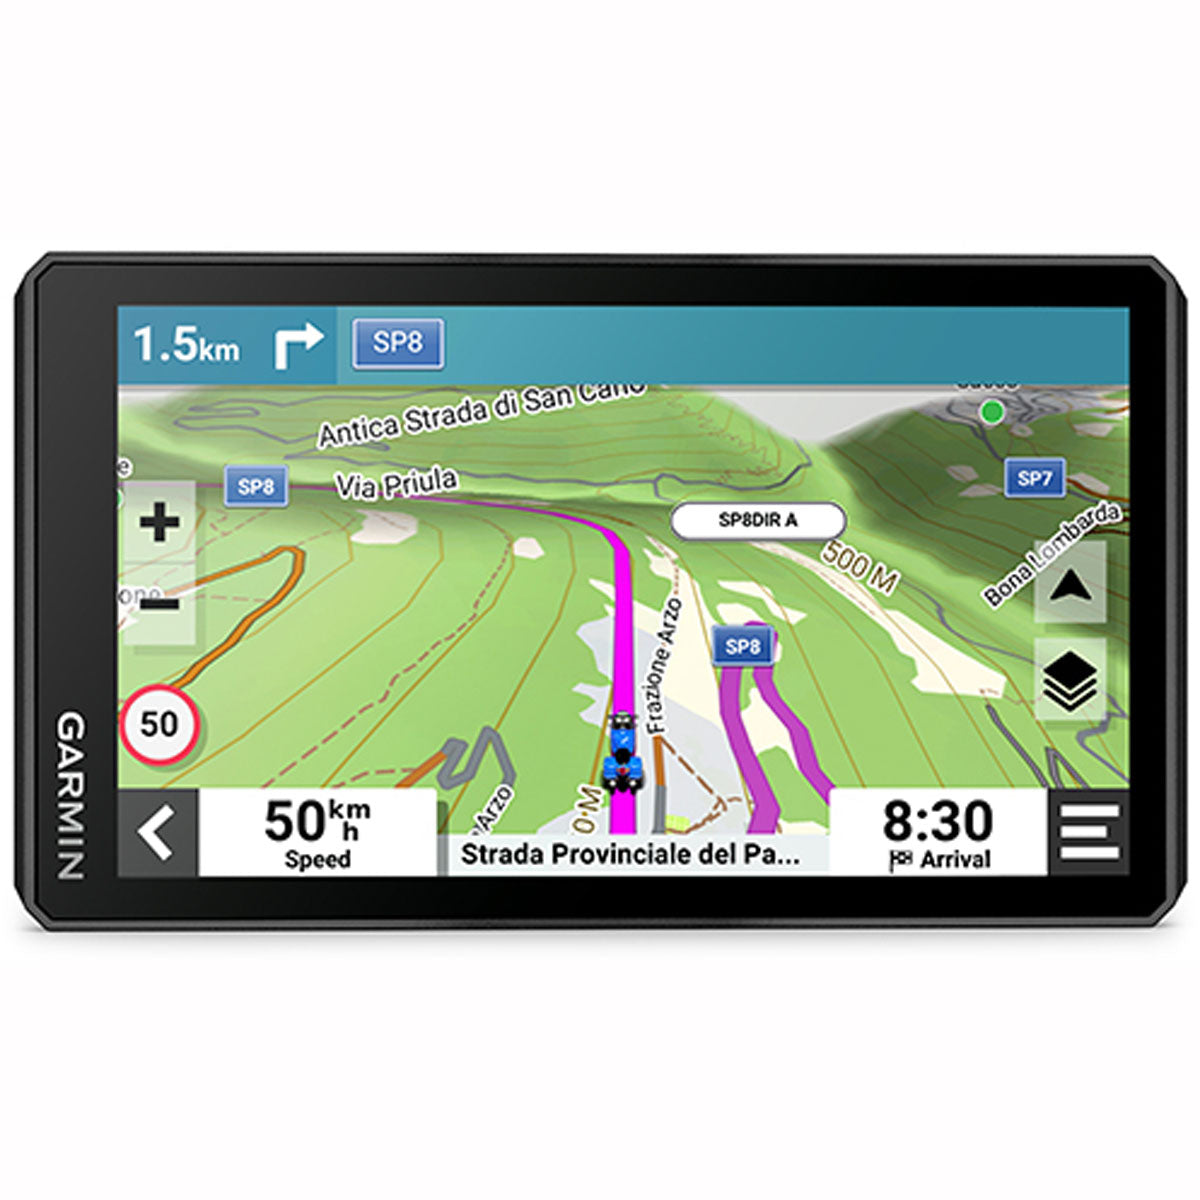 The Garmin Zumo XT2 rugged motorcycle Sat Nav is built for adventure with a larger and brighter 6in sunlight-readable display that is built to withstand weather and handlebar vibrations.